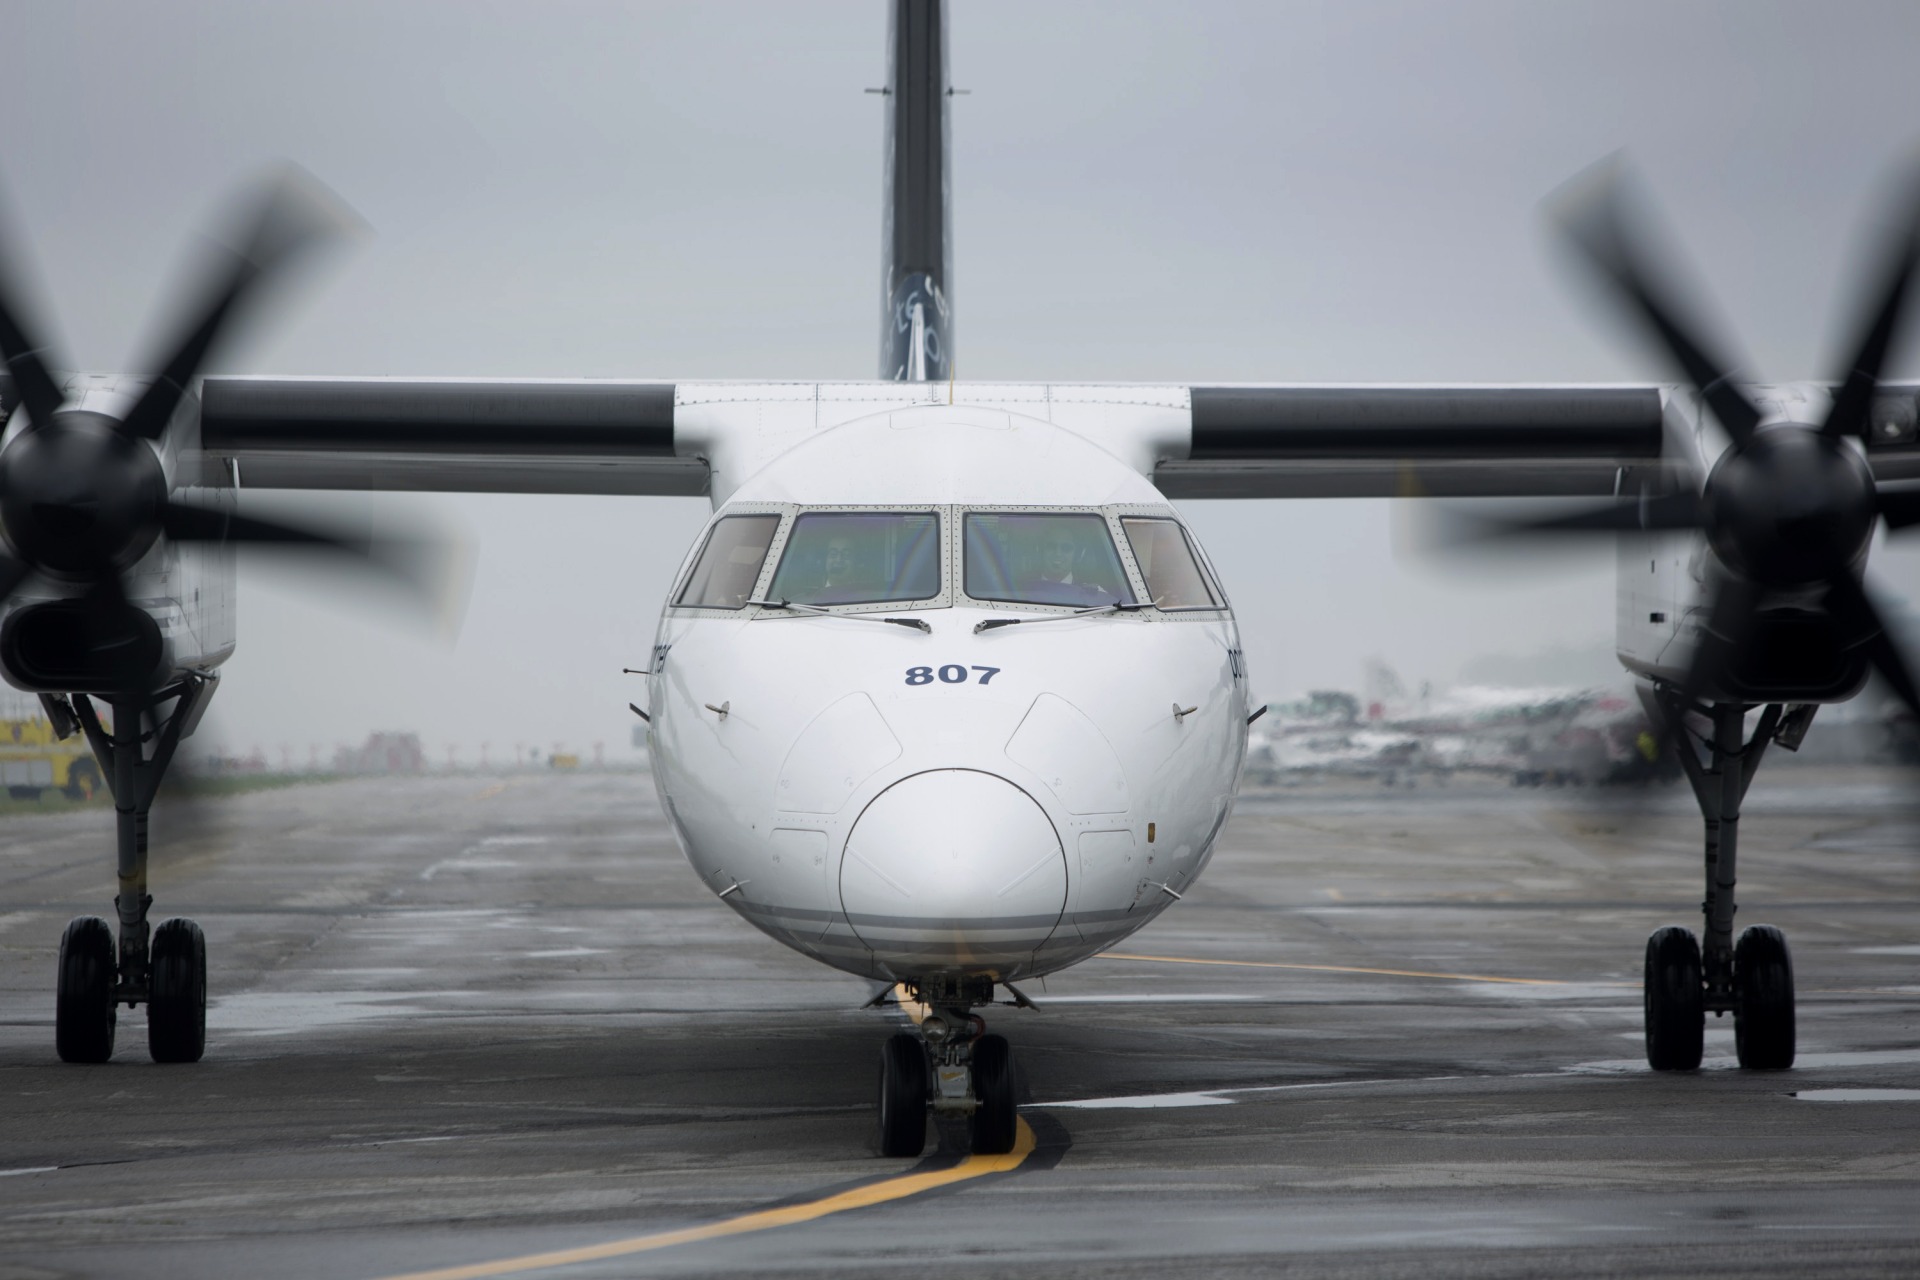 Views Of Billy Bishop Airport As Porter Airlines To Discuss Growth Plans